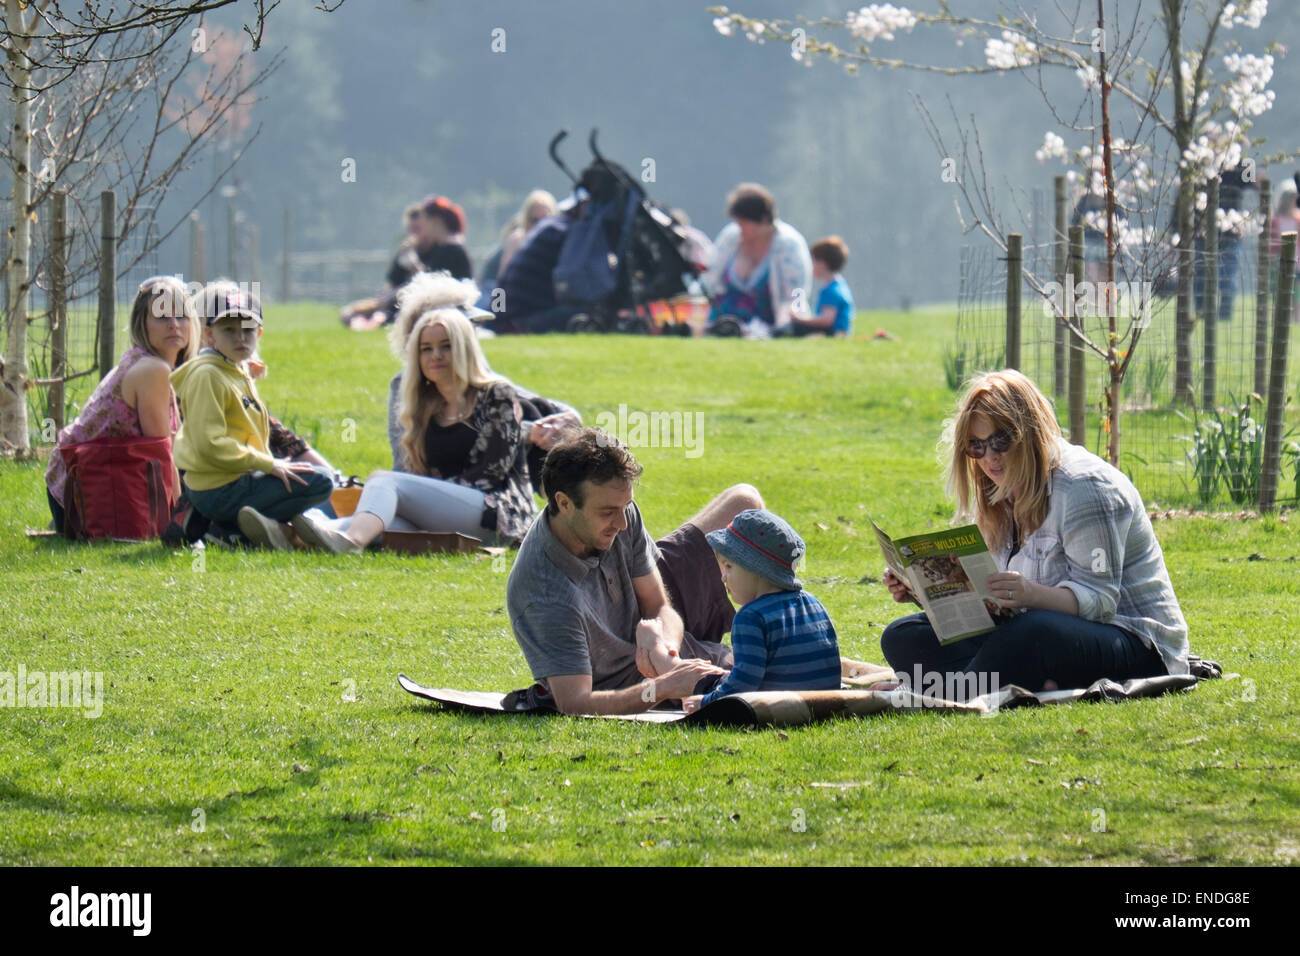 Families relaxing, picnicking & enjoying the sunshine together in a park in the UK Stock Photo